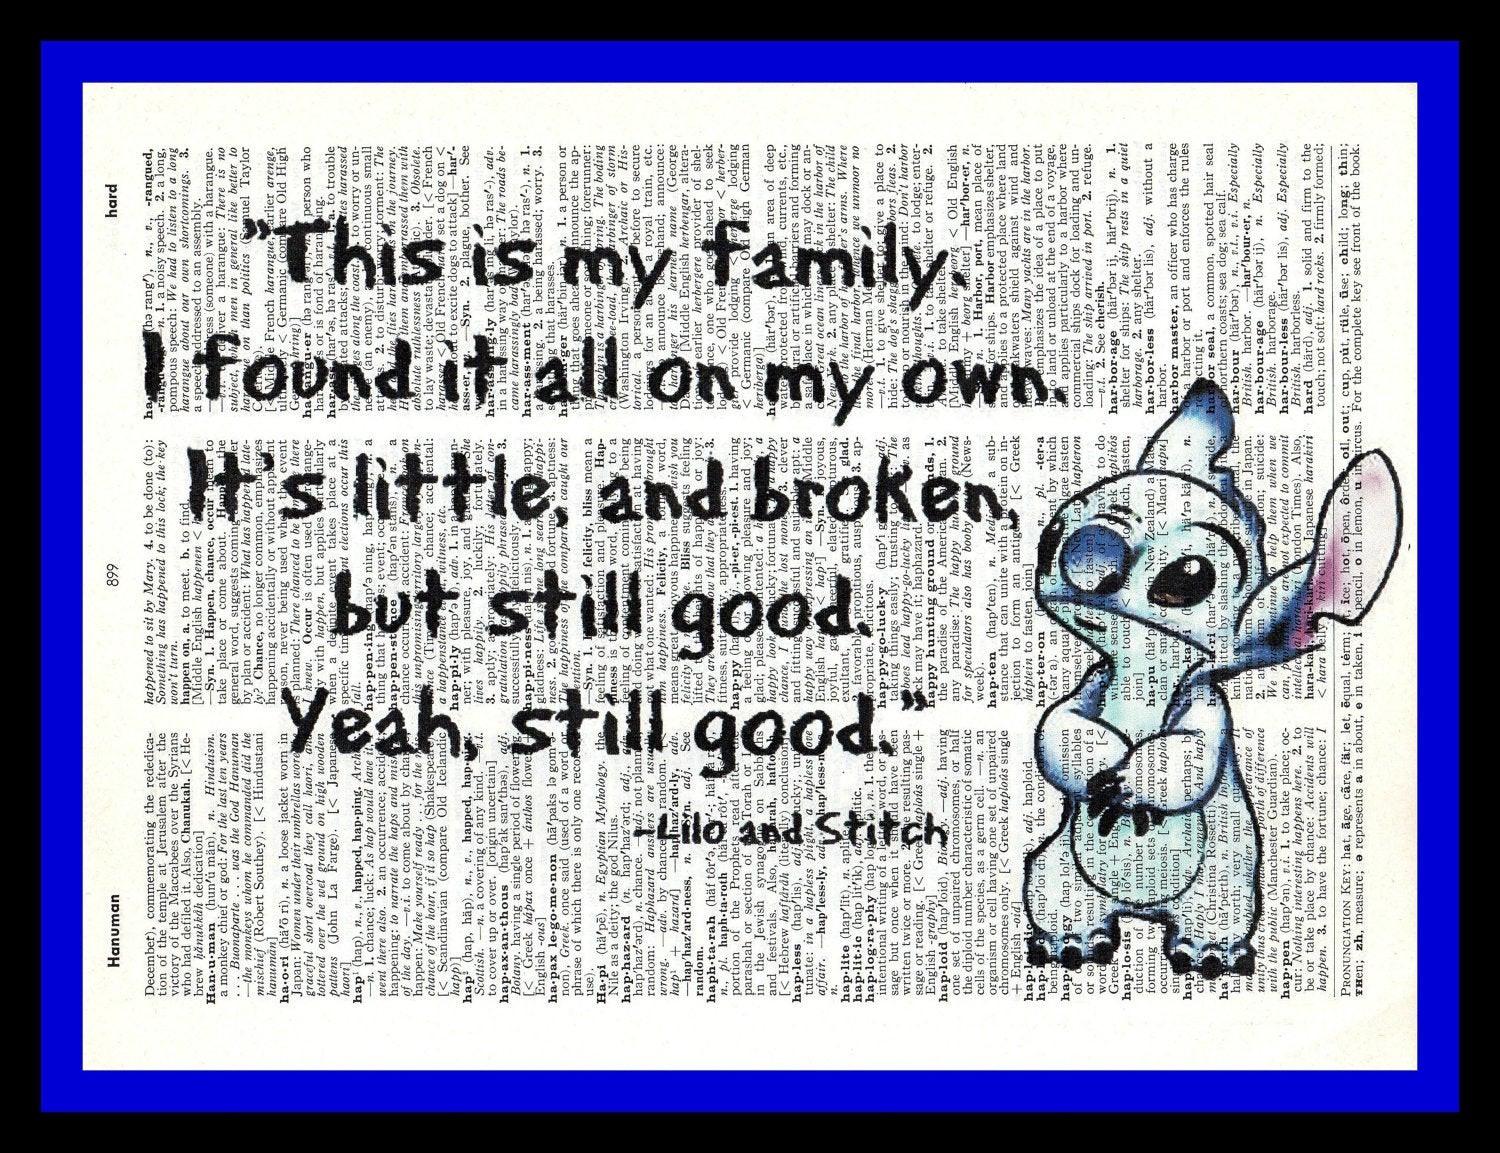 Lilo And Stitch Quotes Family
 Buy Any 2 Prints 1 Free Family Lilo and by